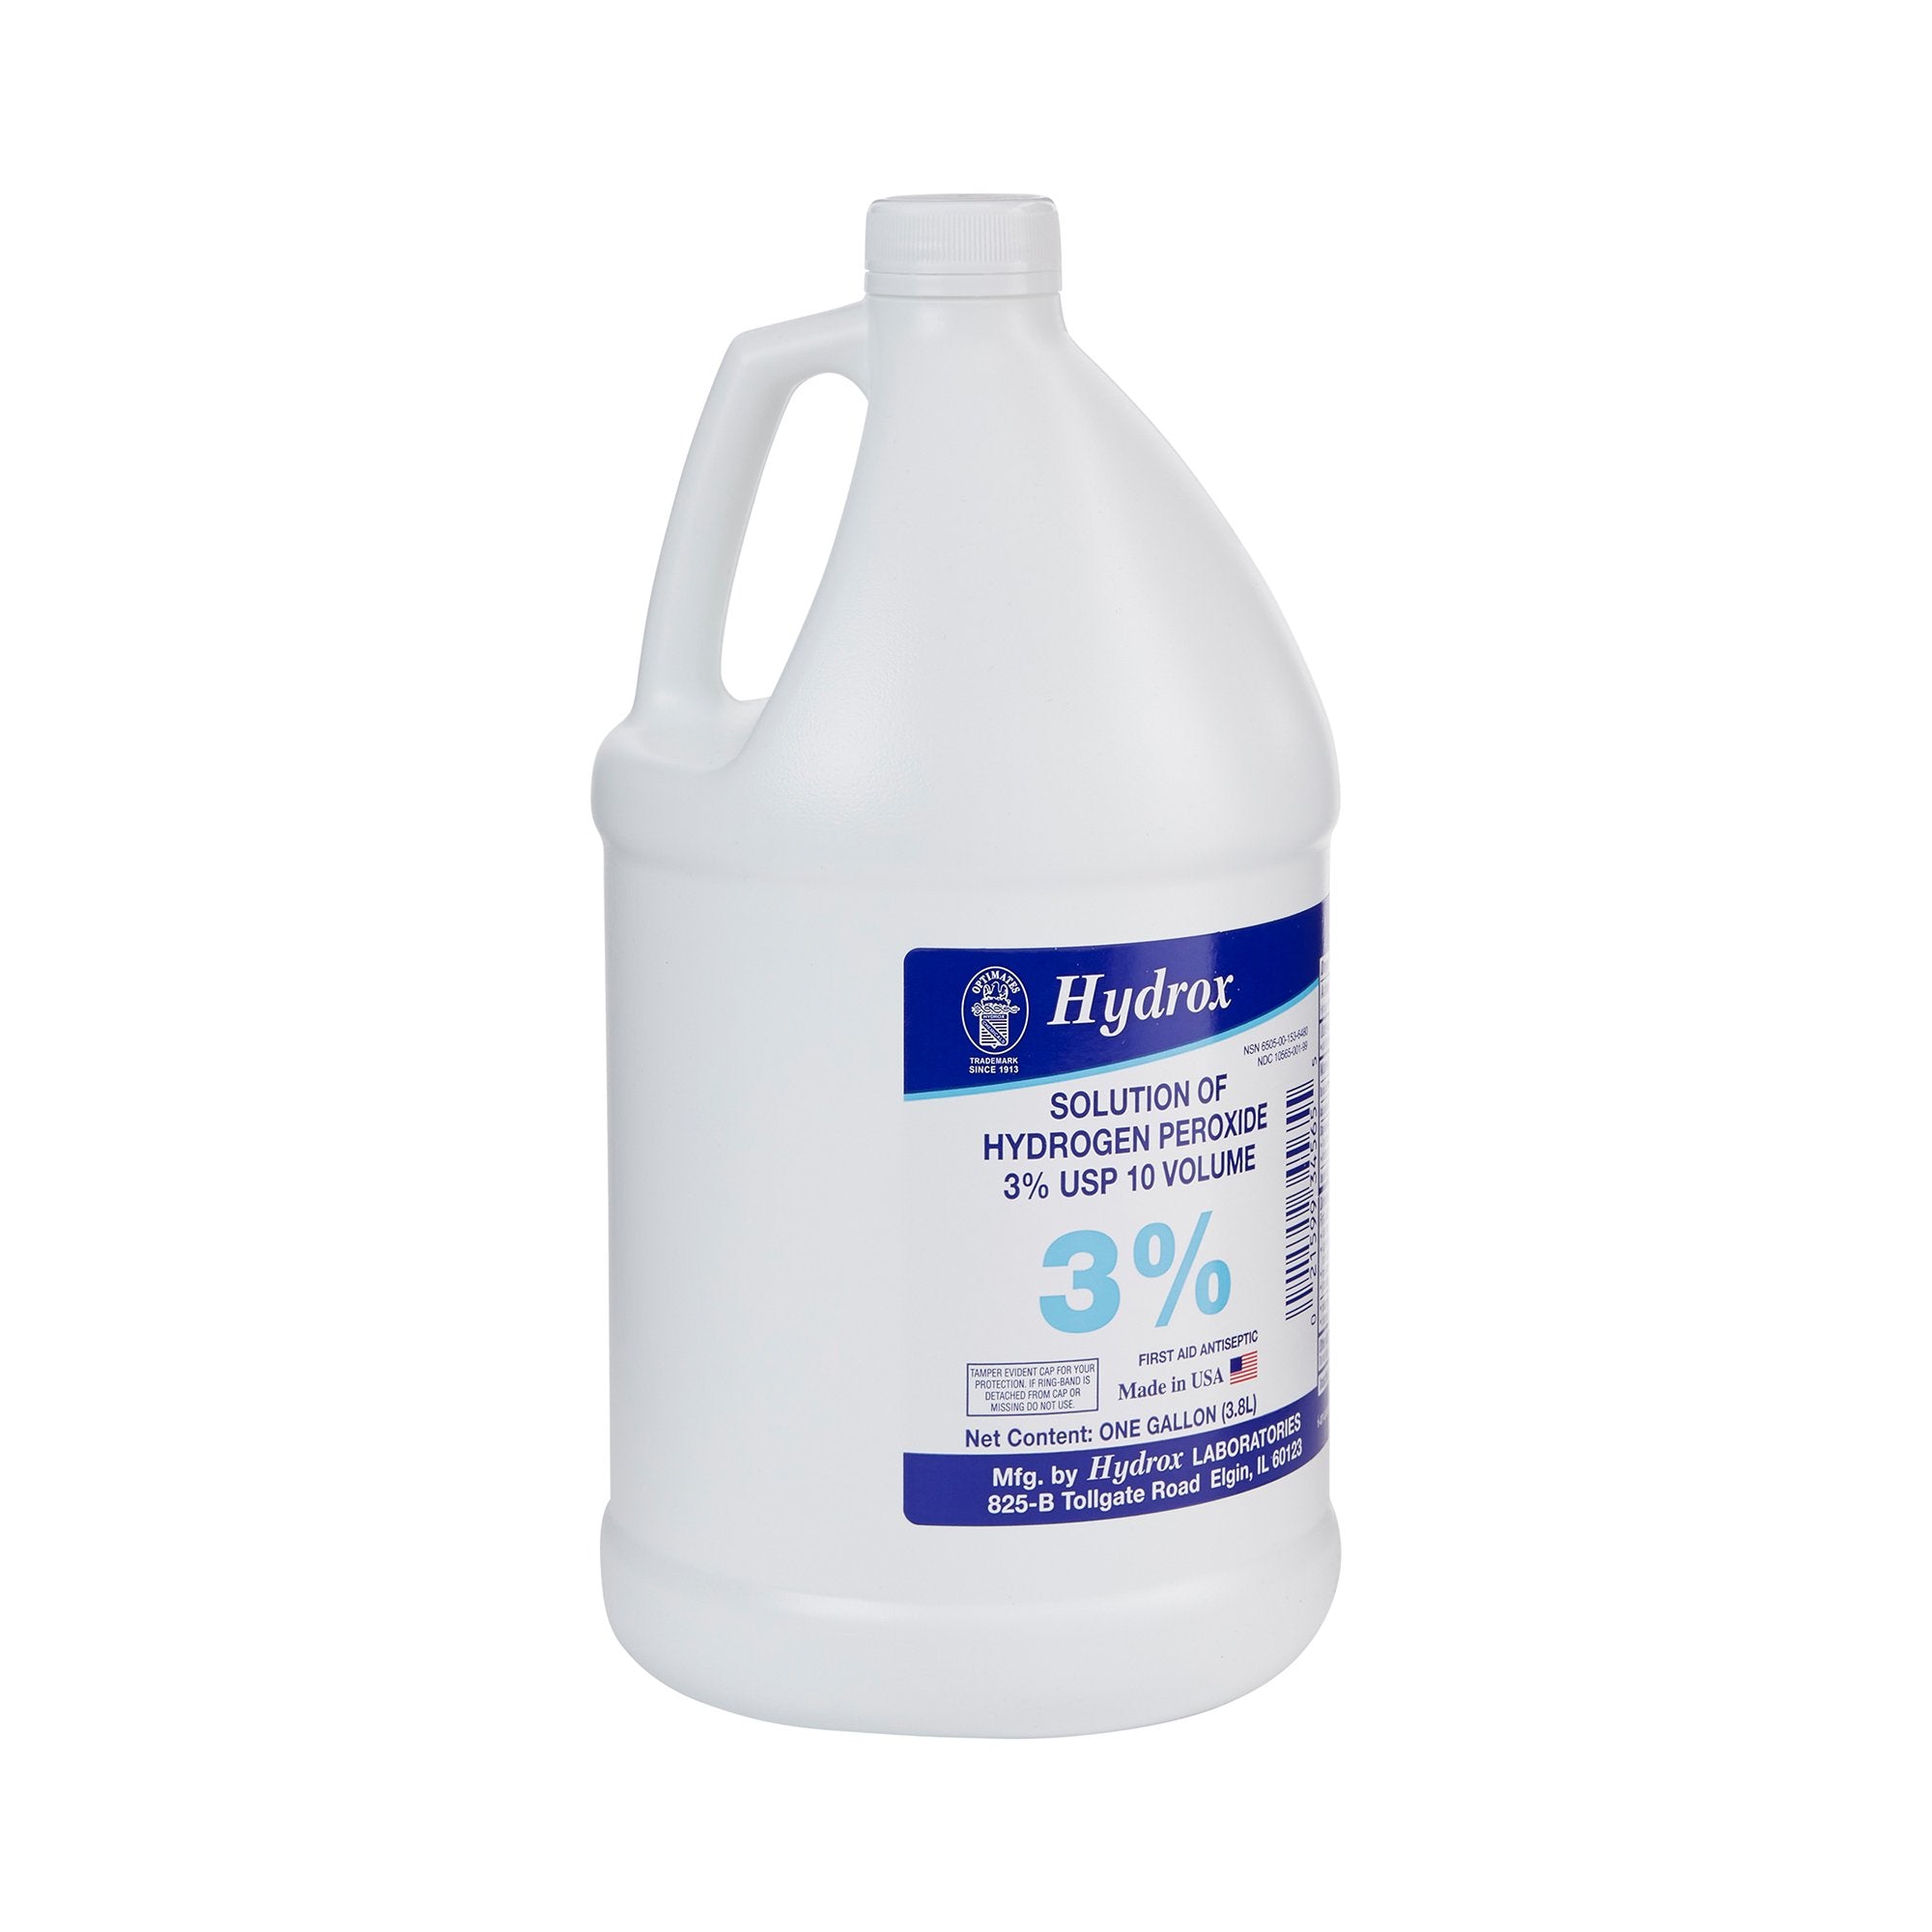 Antiseptic Hydrox Topical Liquid 1 gal. Bottle